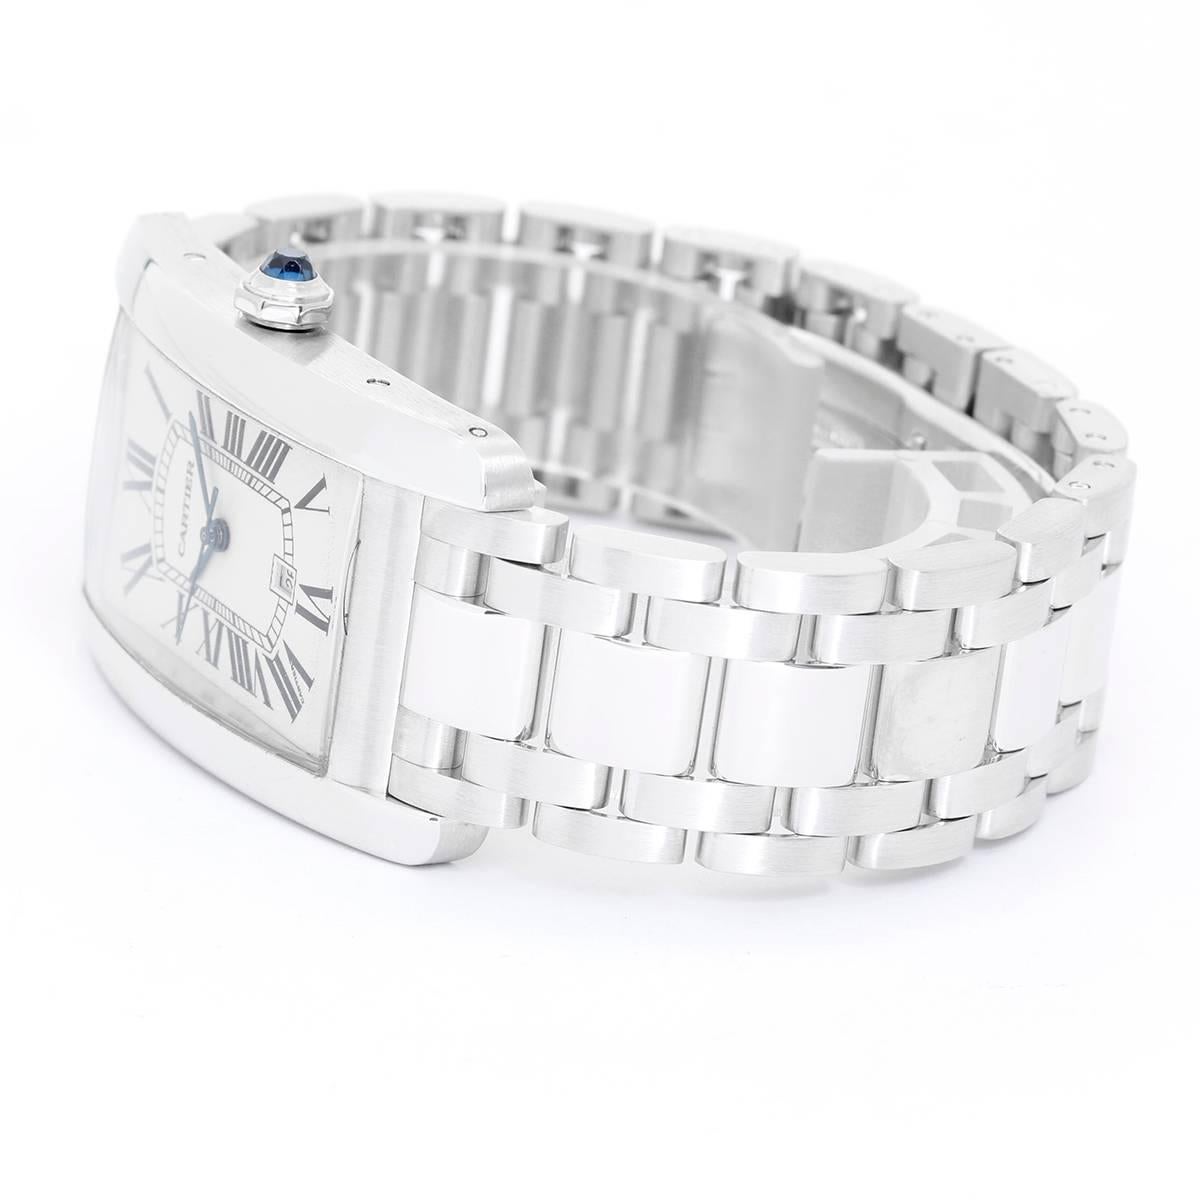 Cartier Tank Americaine 18K White Gold W26055L1 -  Automatic winding. 18K White Gold ( 26 x 44 mm ). Silvered guilloche dial with black Roman numerals; Date at 6:00 o' clock. 18K White Gold Cartier bracelet with deployant clasp. Pre-owned with